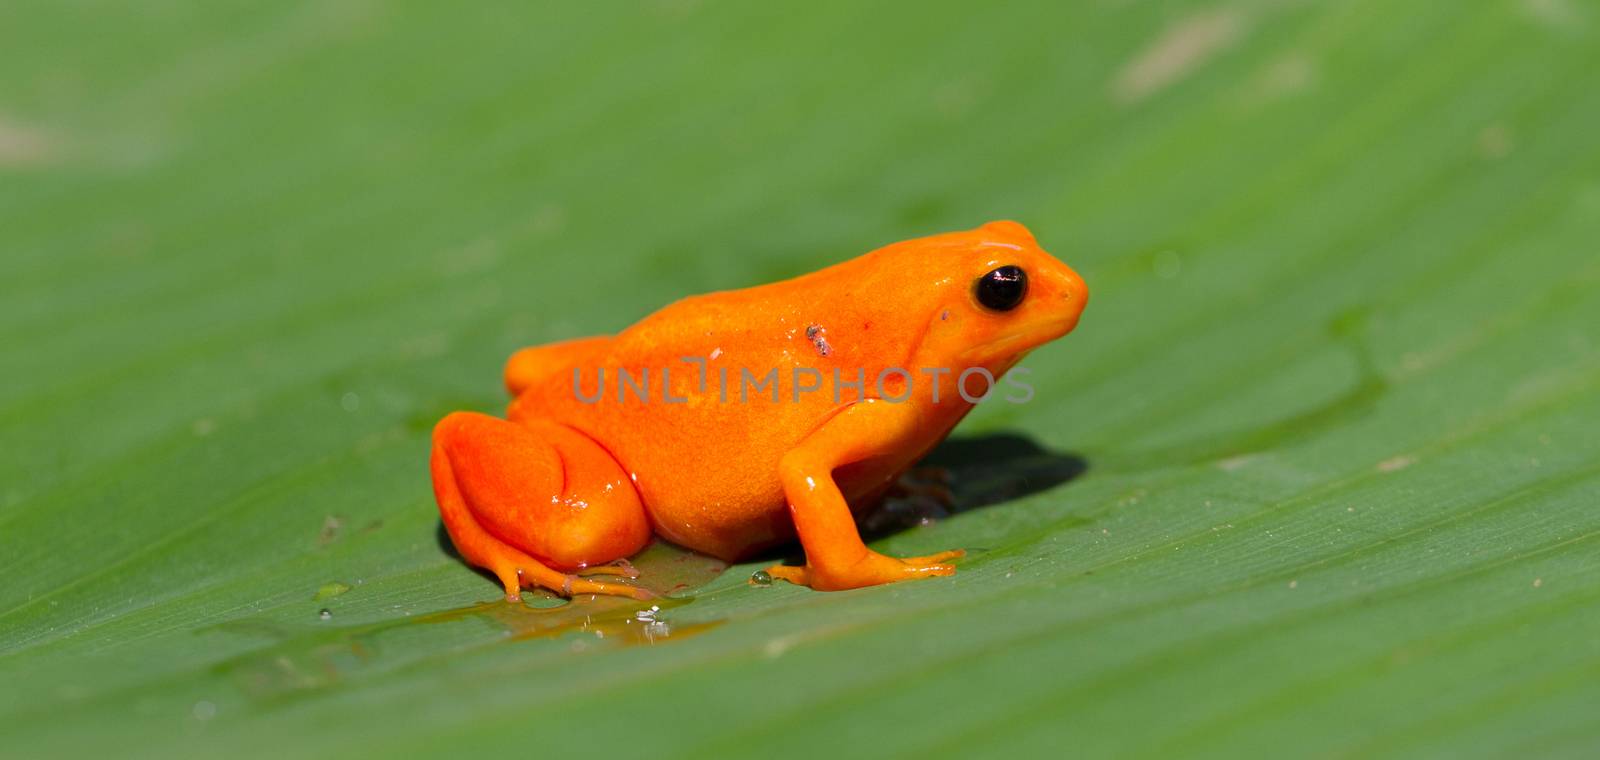 Tomato frog in Madagascar - The tomato frog is endemic to Madagascar